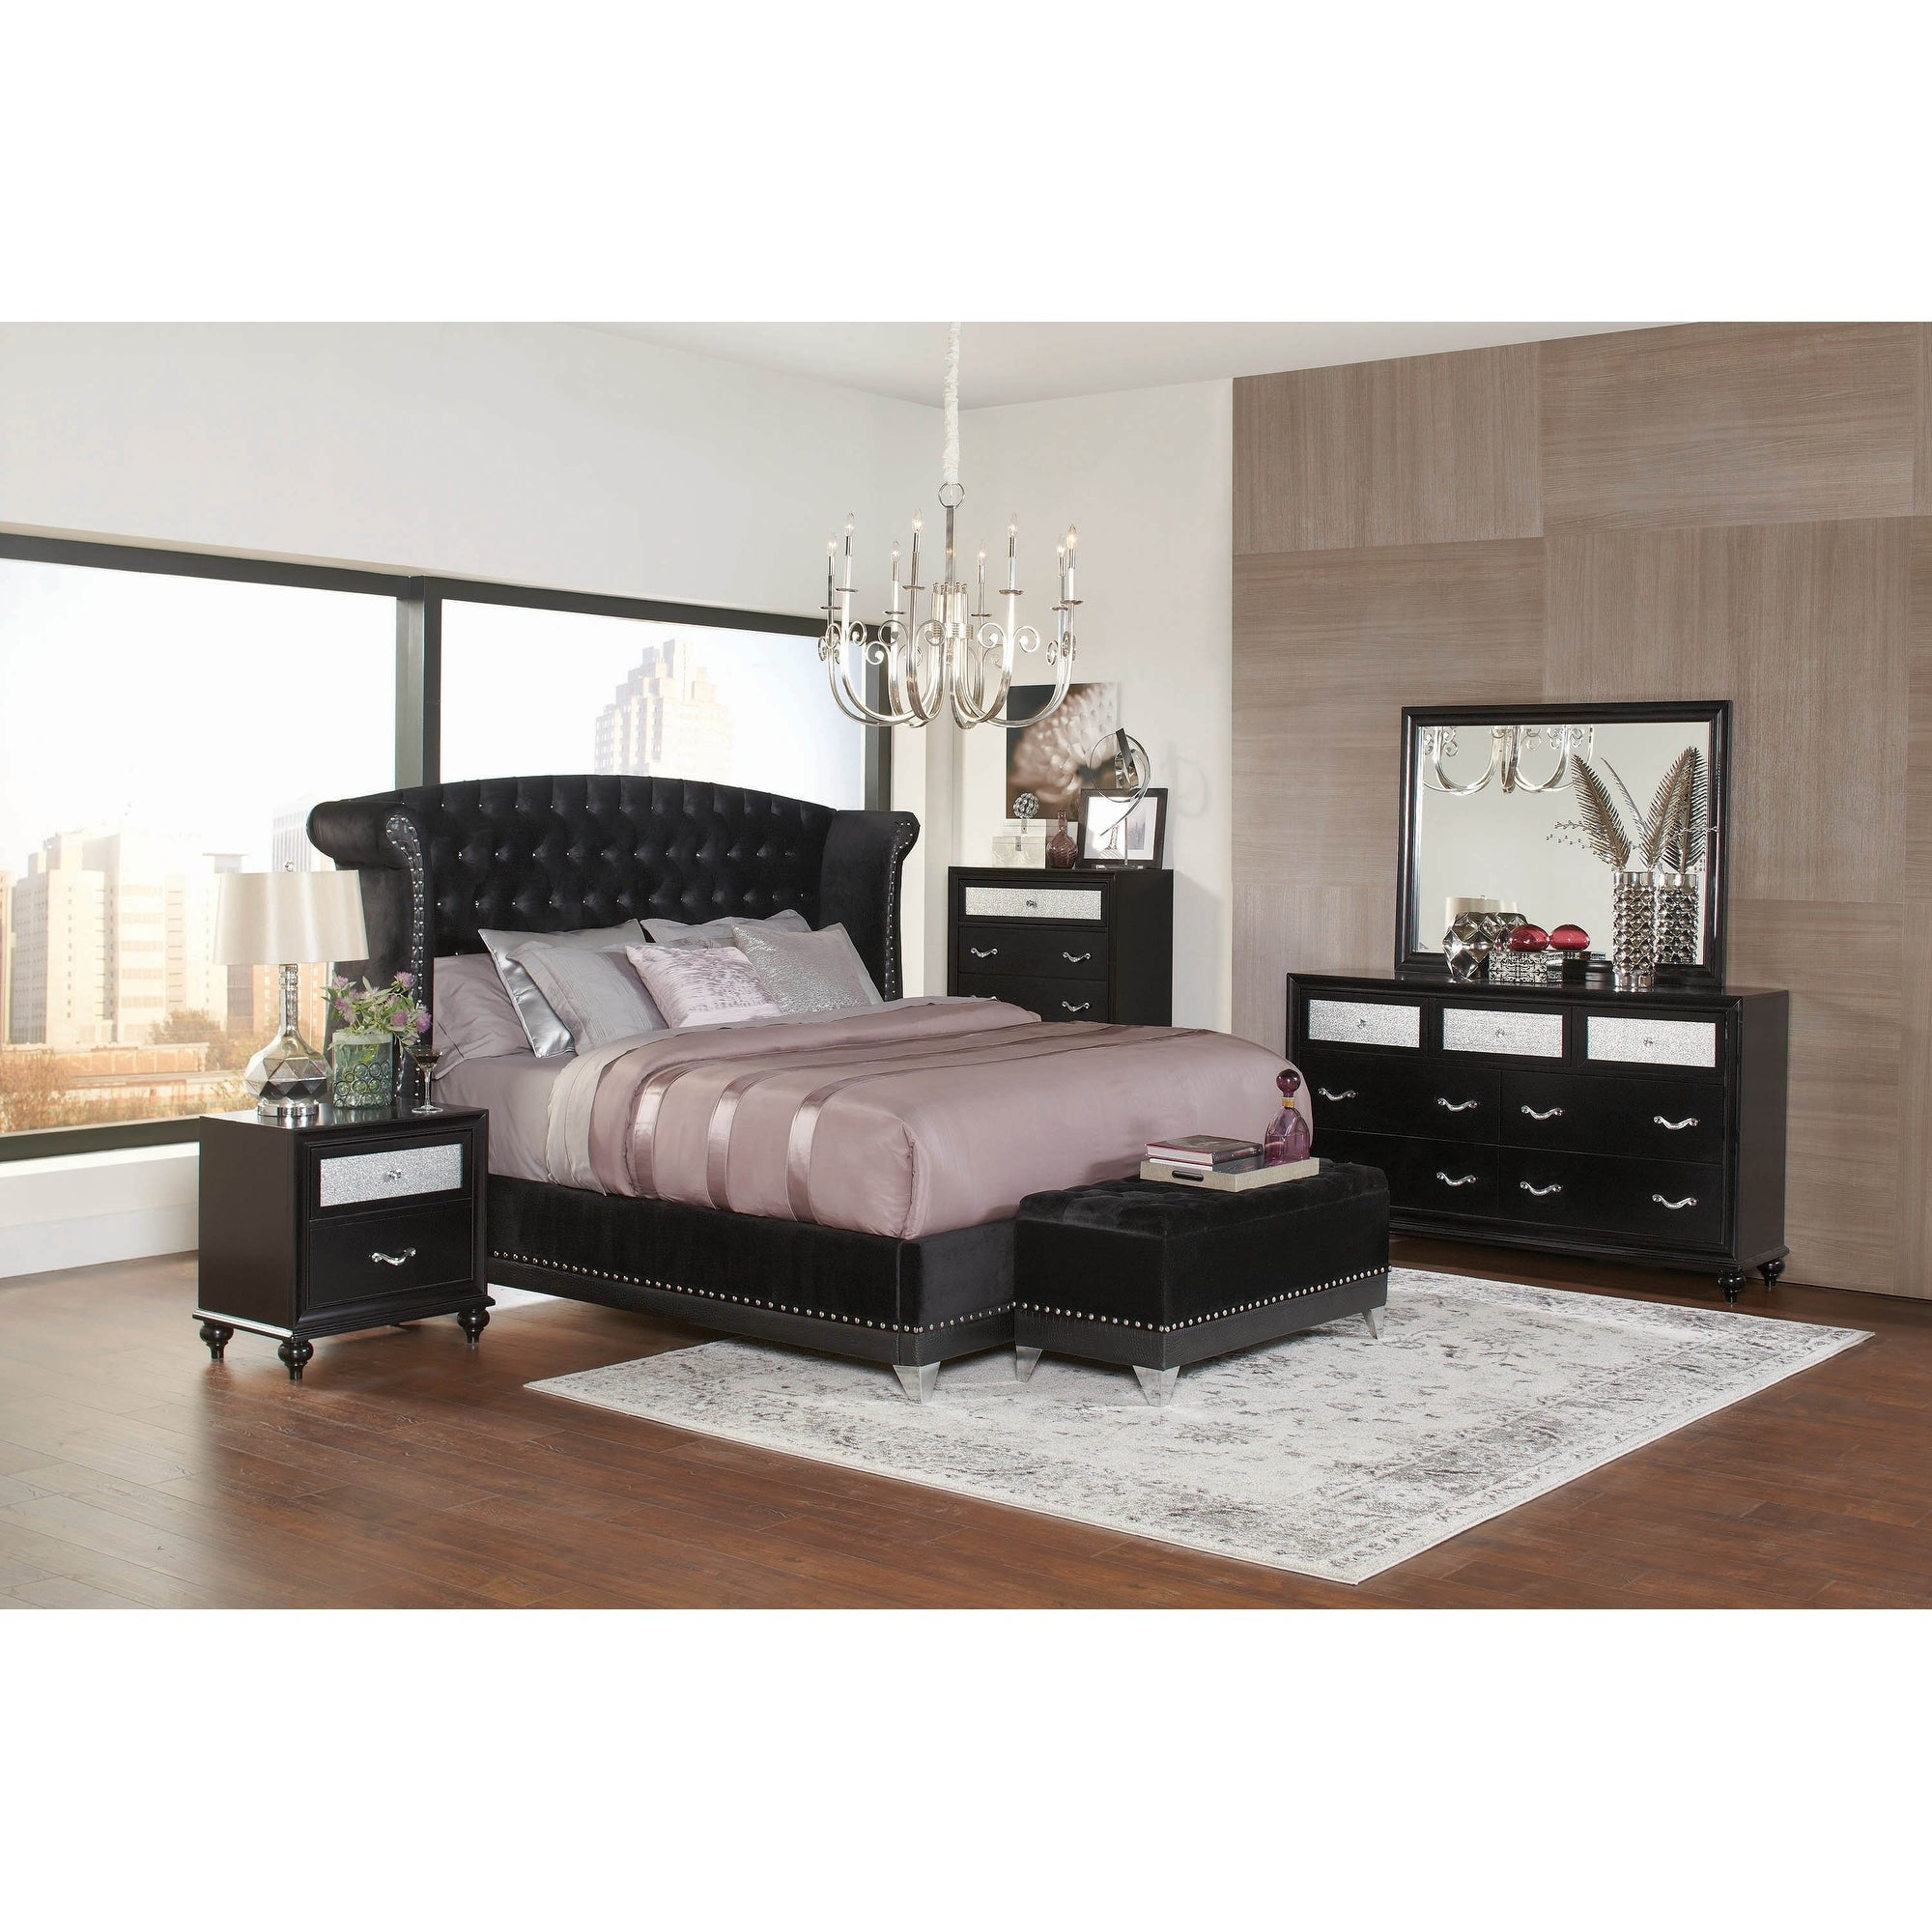 Tamsin Black And Metallic 3 Piece Platform Bedroom Set With Dresser intended for dimensions 2000 X 2000